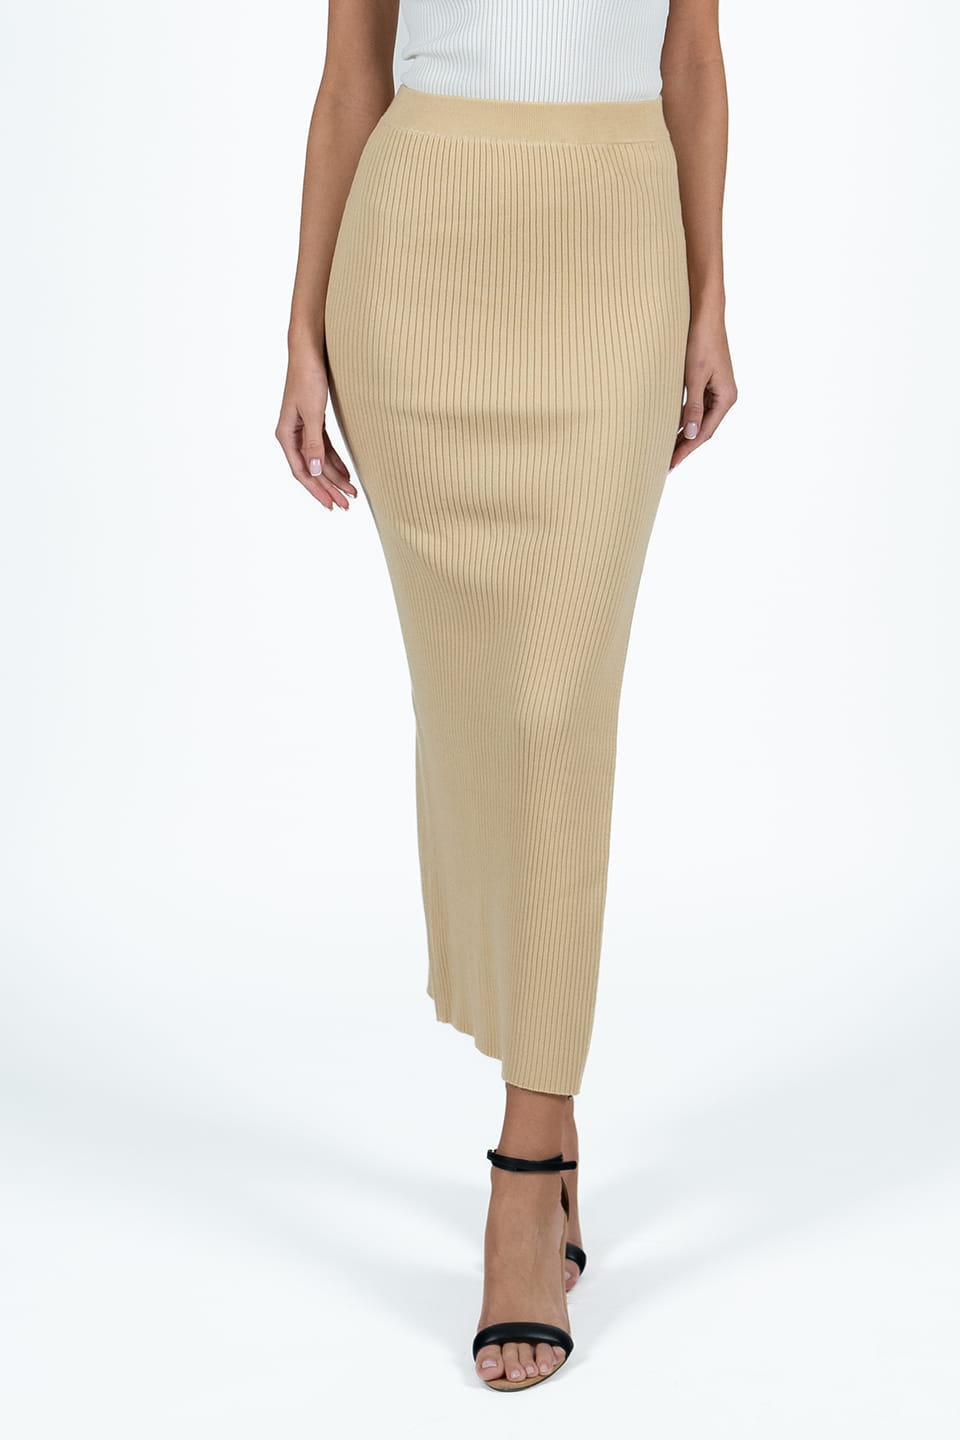 Shop online trendy Beige Skirts from Dodo Bar Or Fashion designer. Product gallery 1